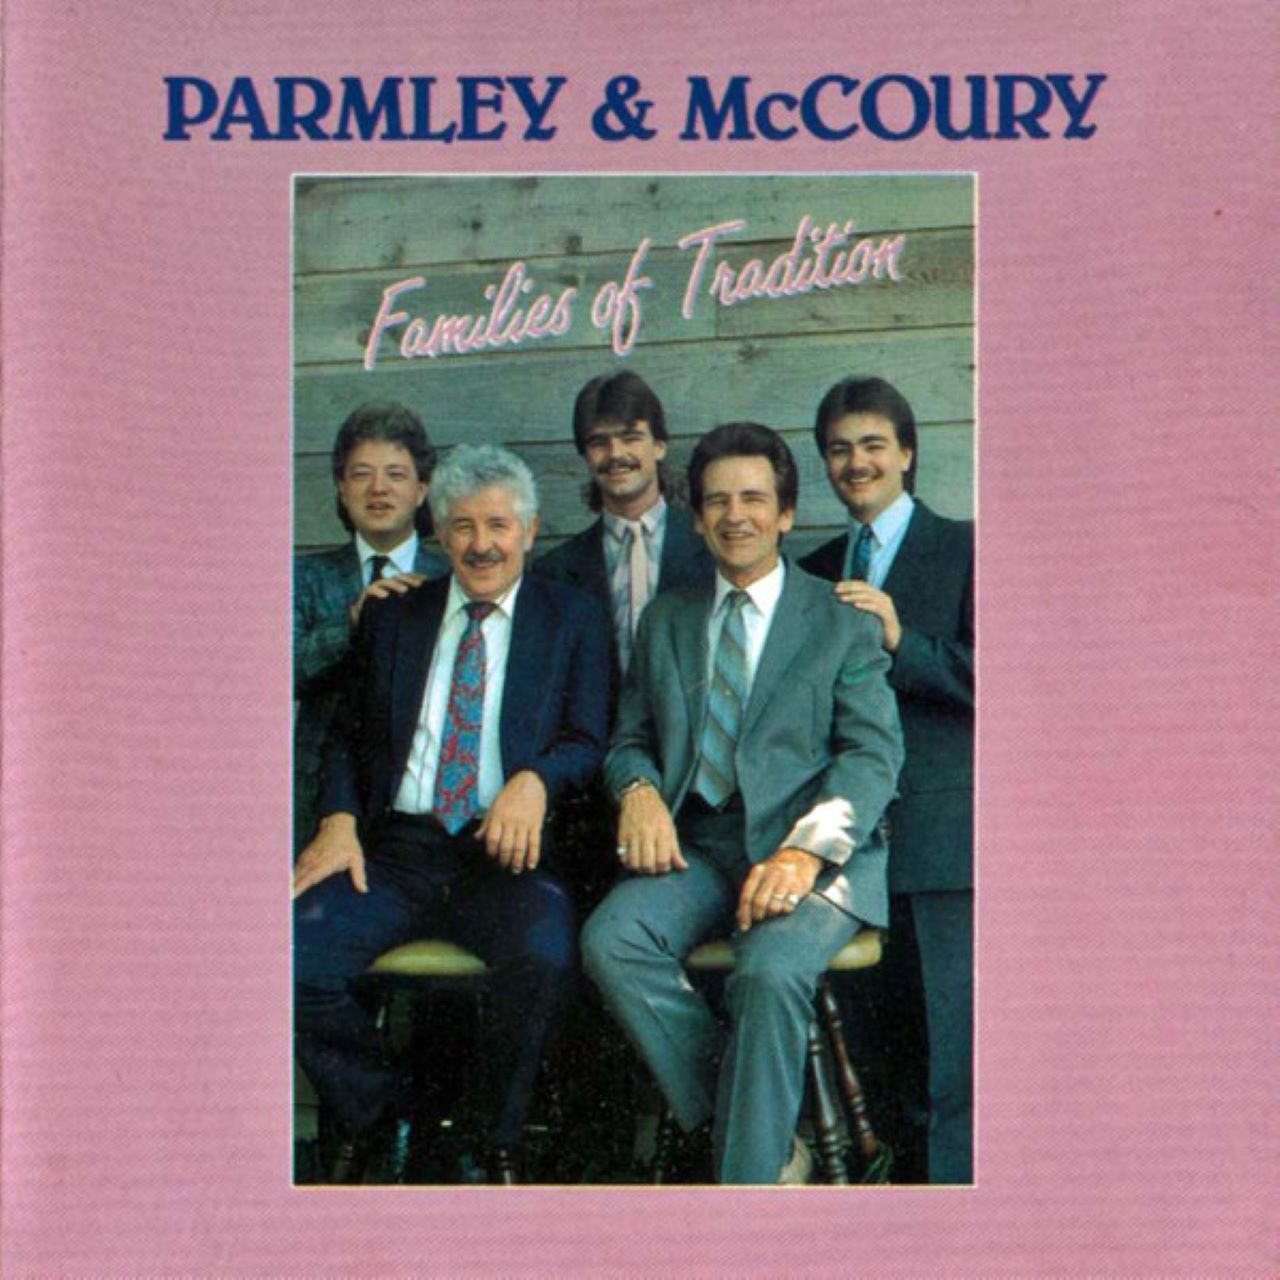 Parmley & McCoury - Families Of Tradition cover album